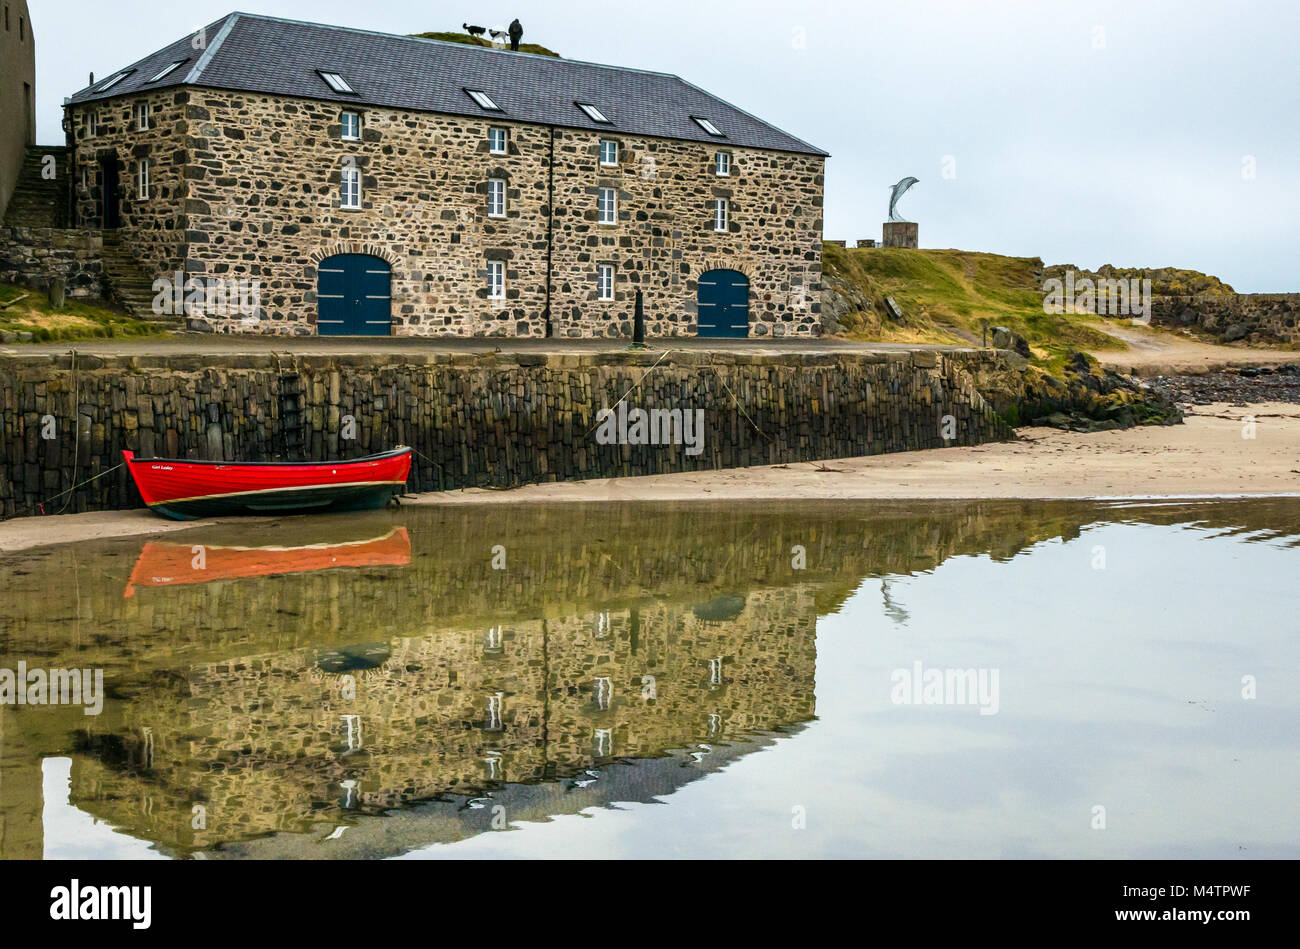 Small red rowing boat, picturesque harbour, Portsoy, Aberdeenshire, Scotland, UK, with water reflection, historic buildings dolphin sculpture Stock Photo